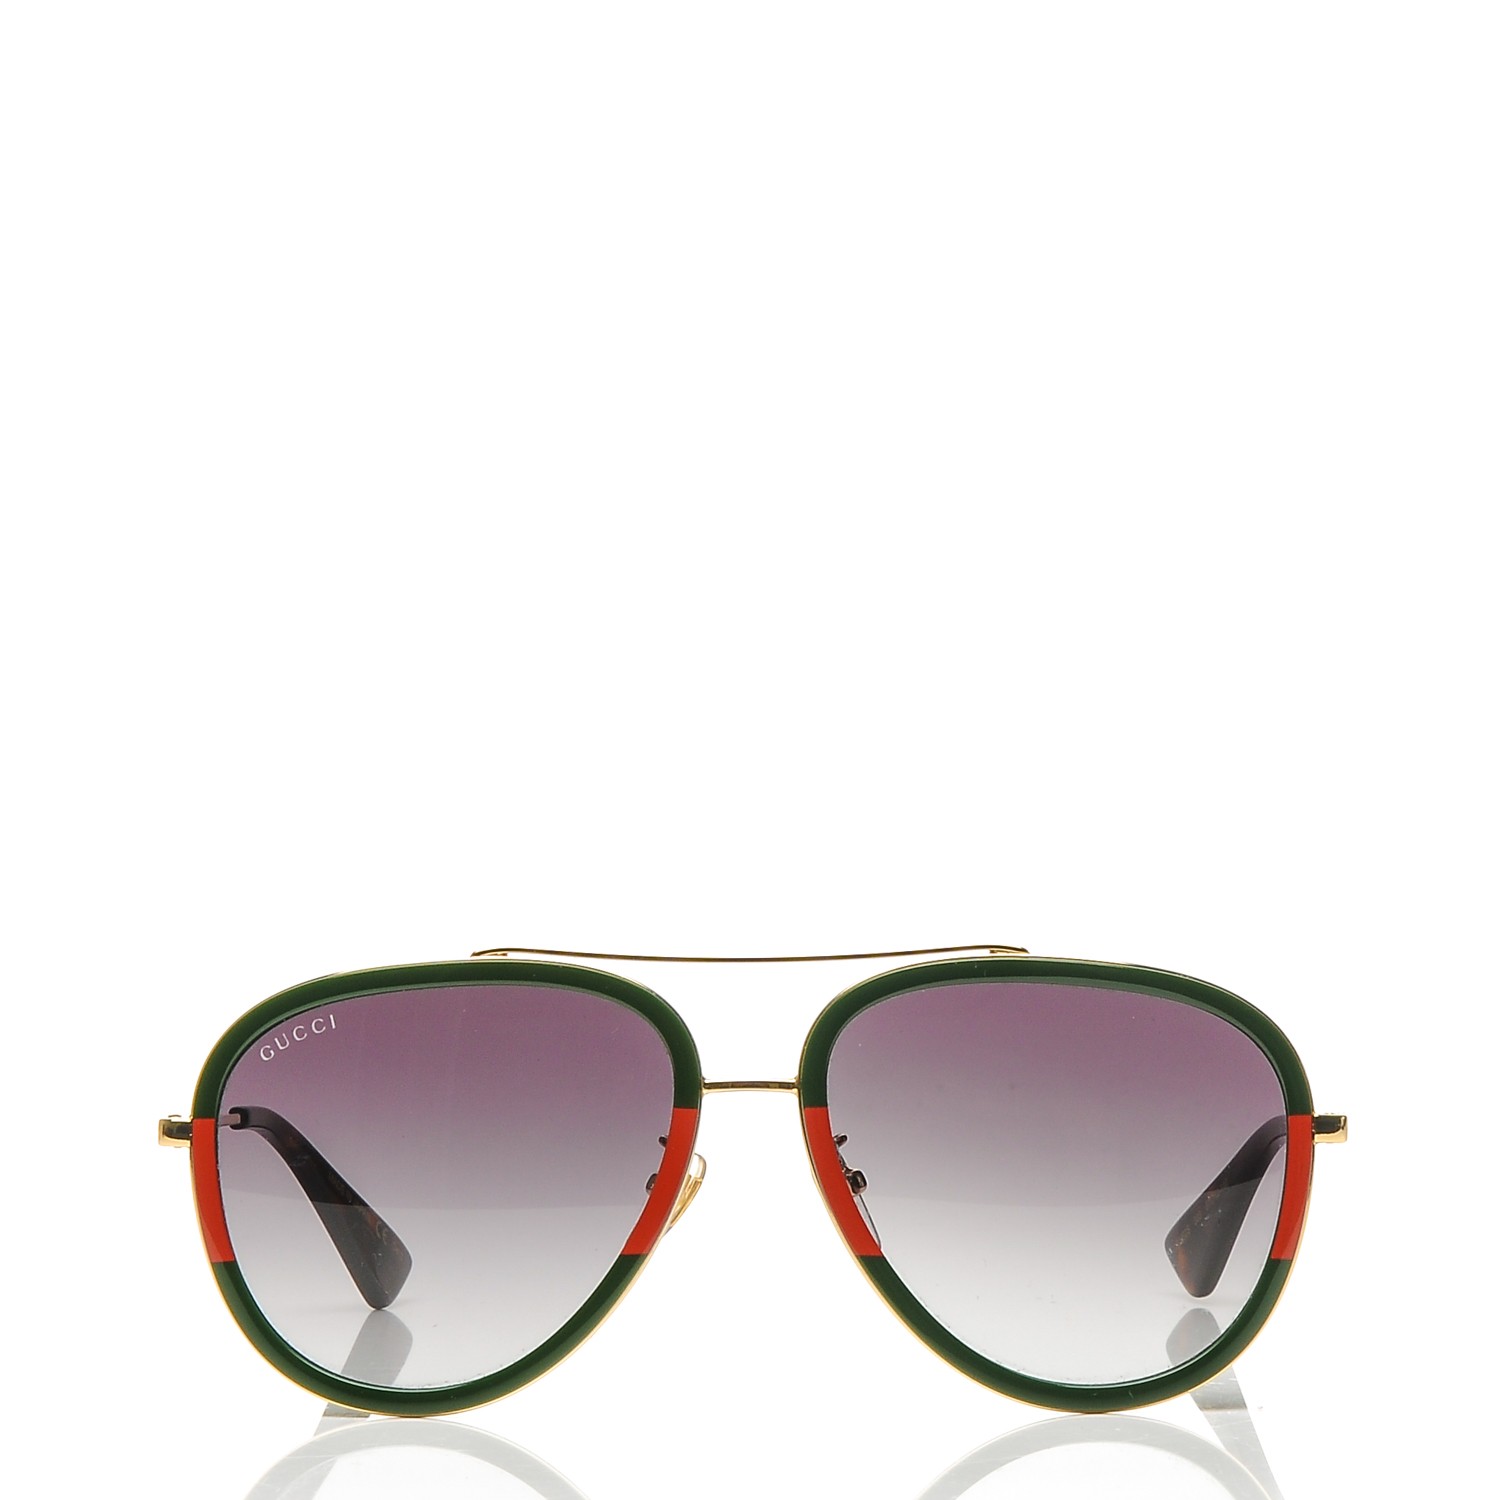 gucci aviator sunglasses green and red